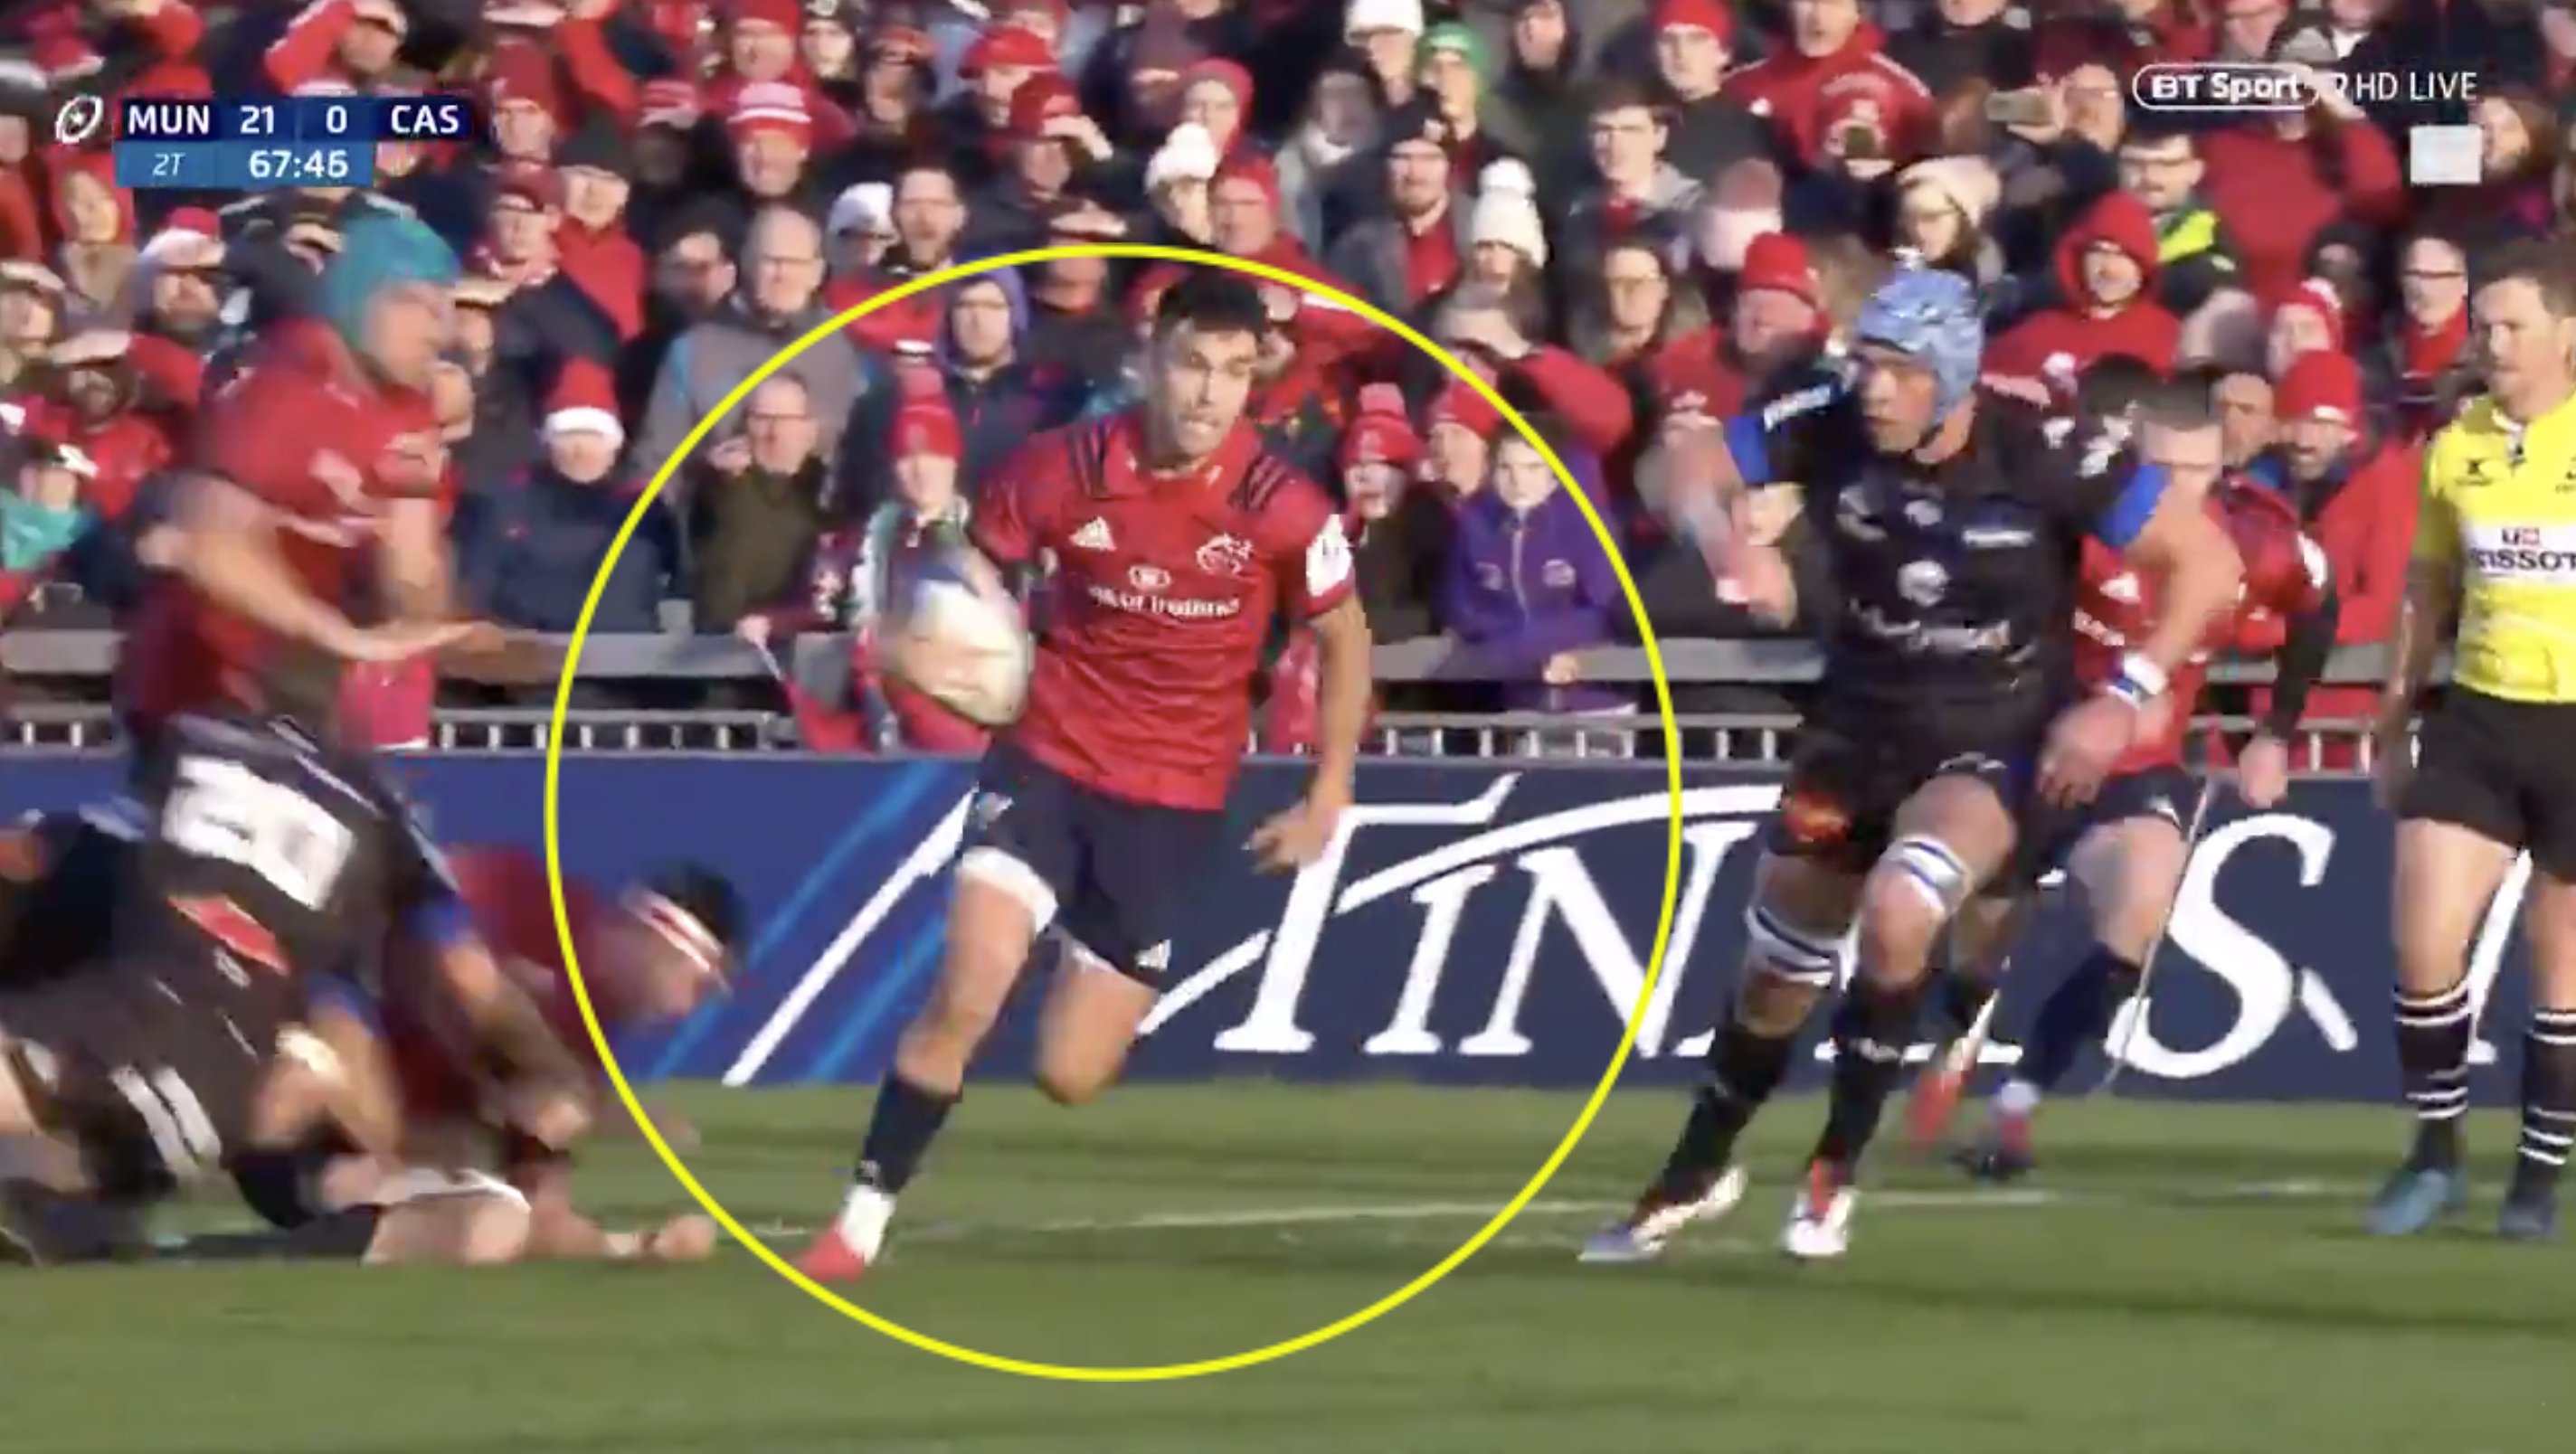 VIDEO: Conor Murray reminds everyone why he is the best in the world with UNREAL back-hand pass